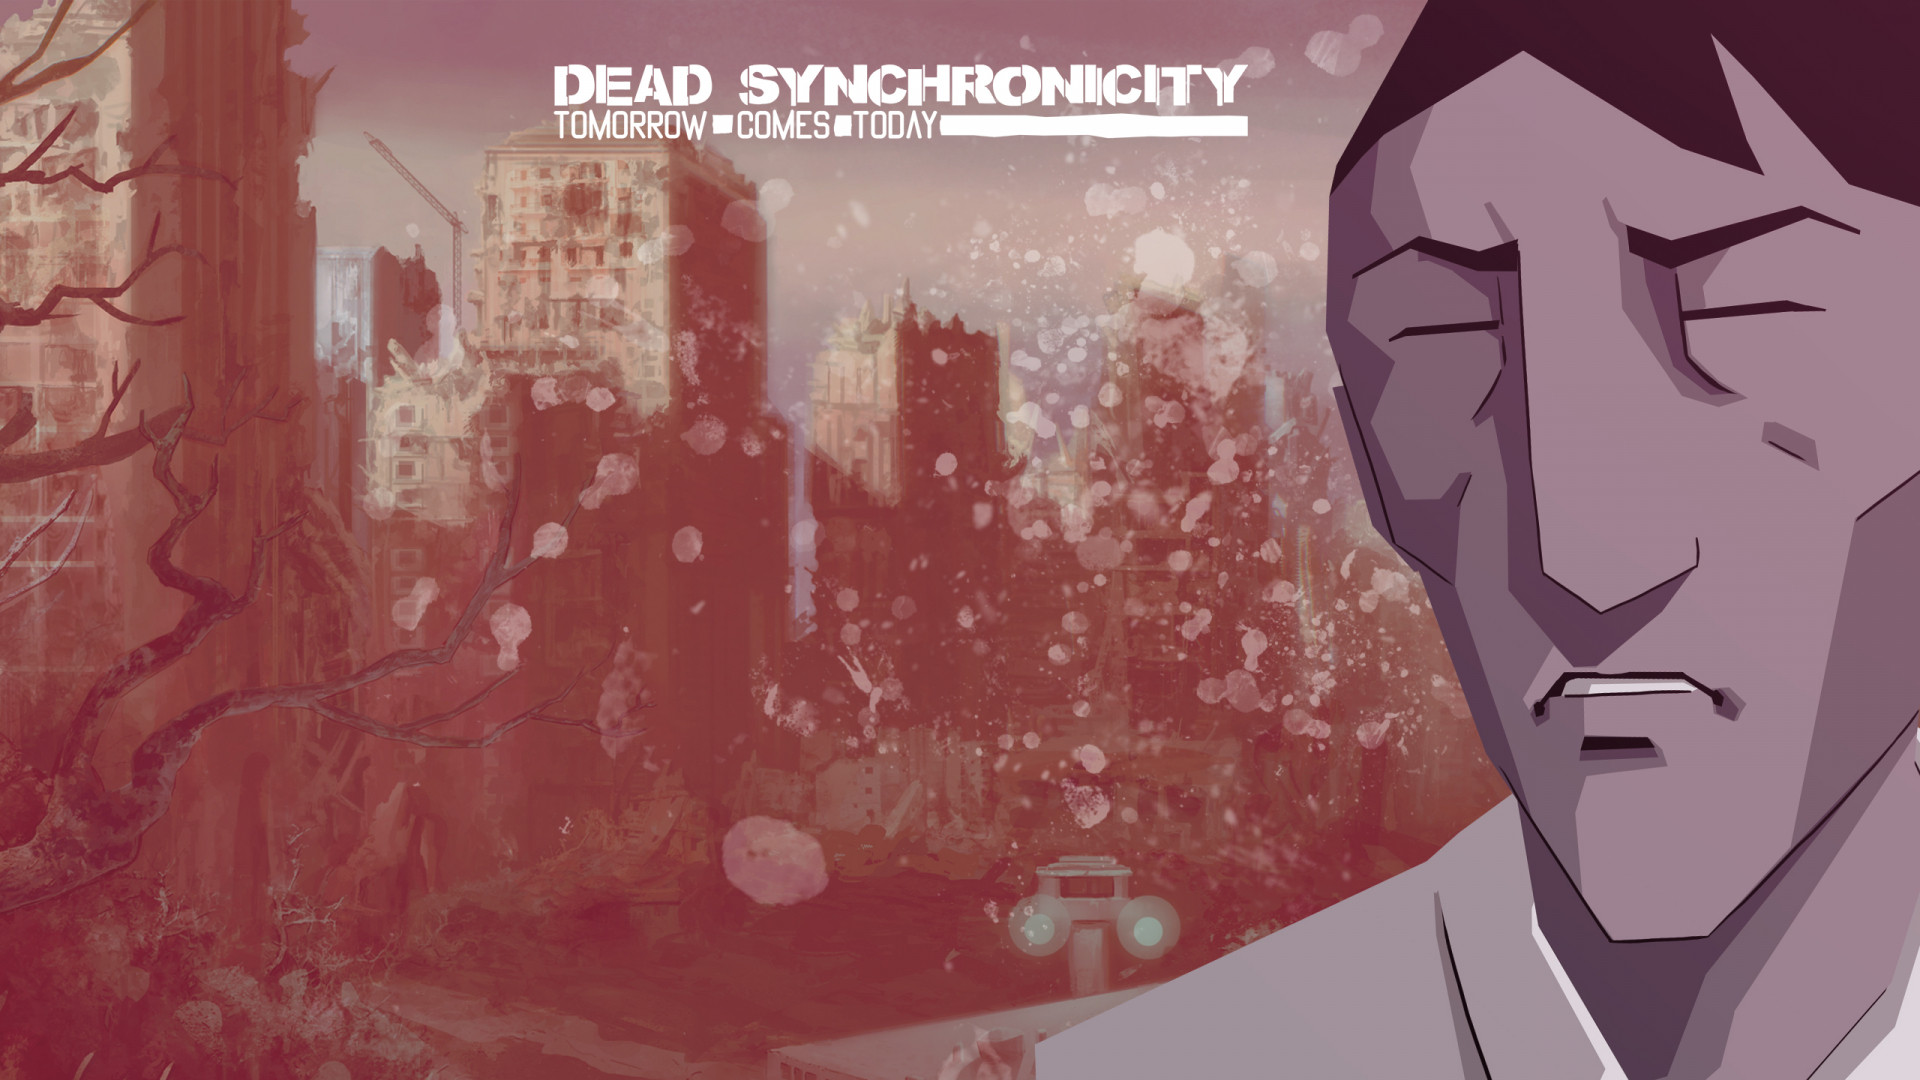 Tomorrow come late. Dead Synchronicity tomorrow comes today ps4.